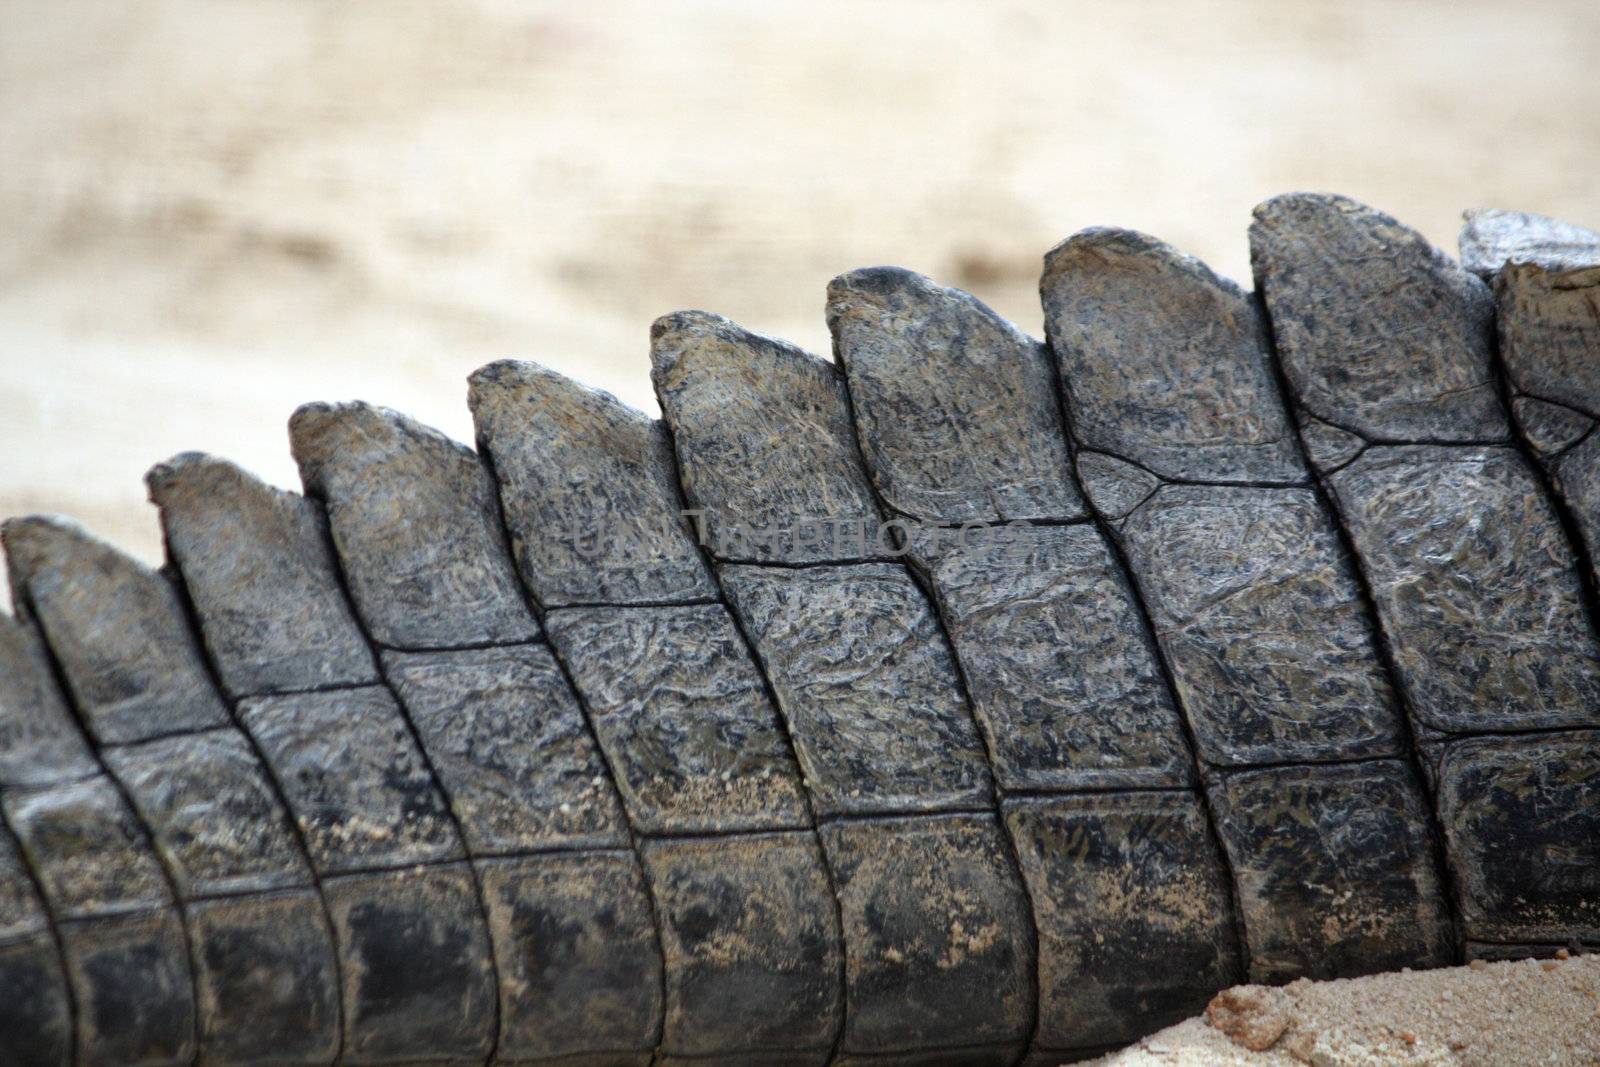 Close up view of the tail of a crocodile.